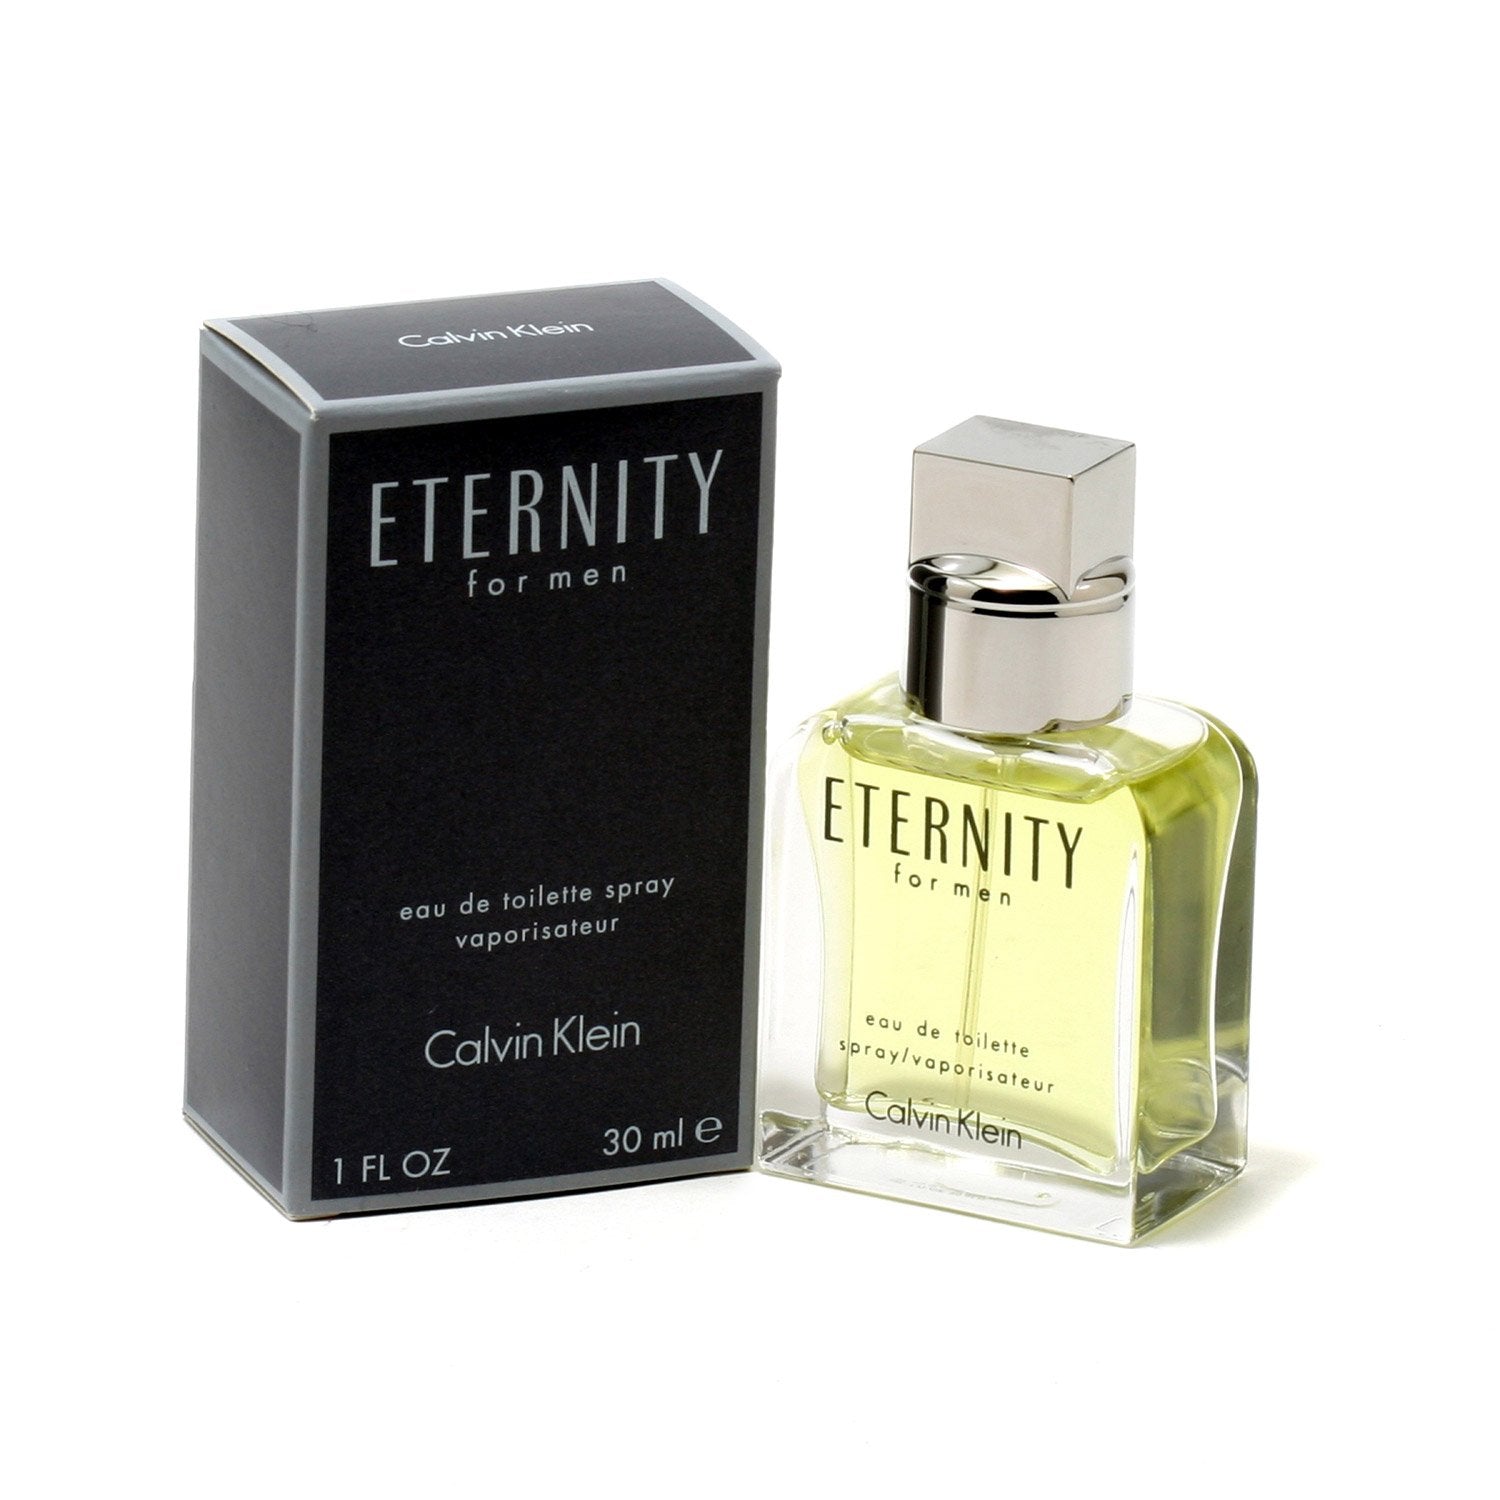 Gift Her a Calvin Klein Eternity Perfume. Best Price. Free Delivery.